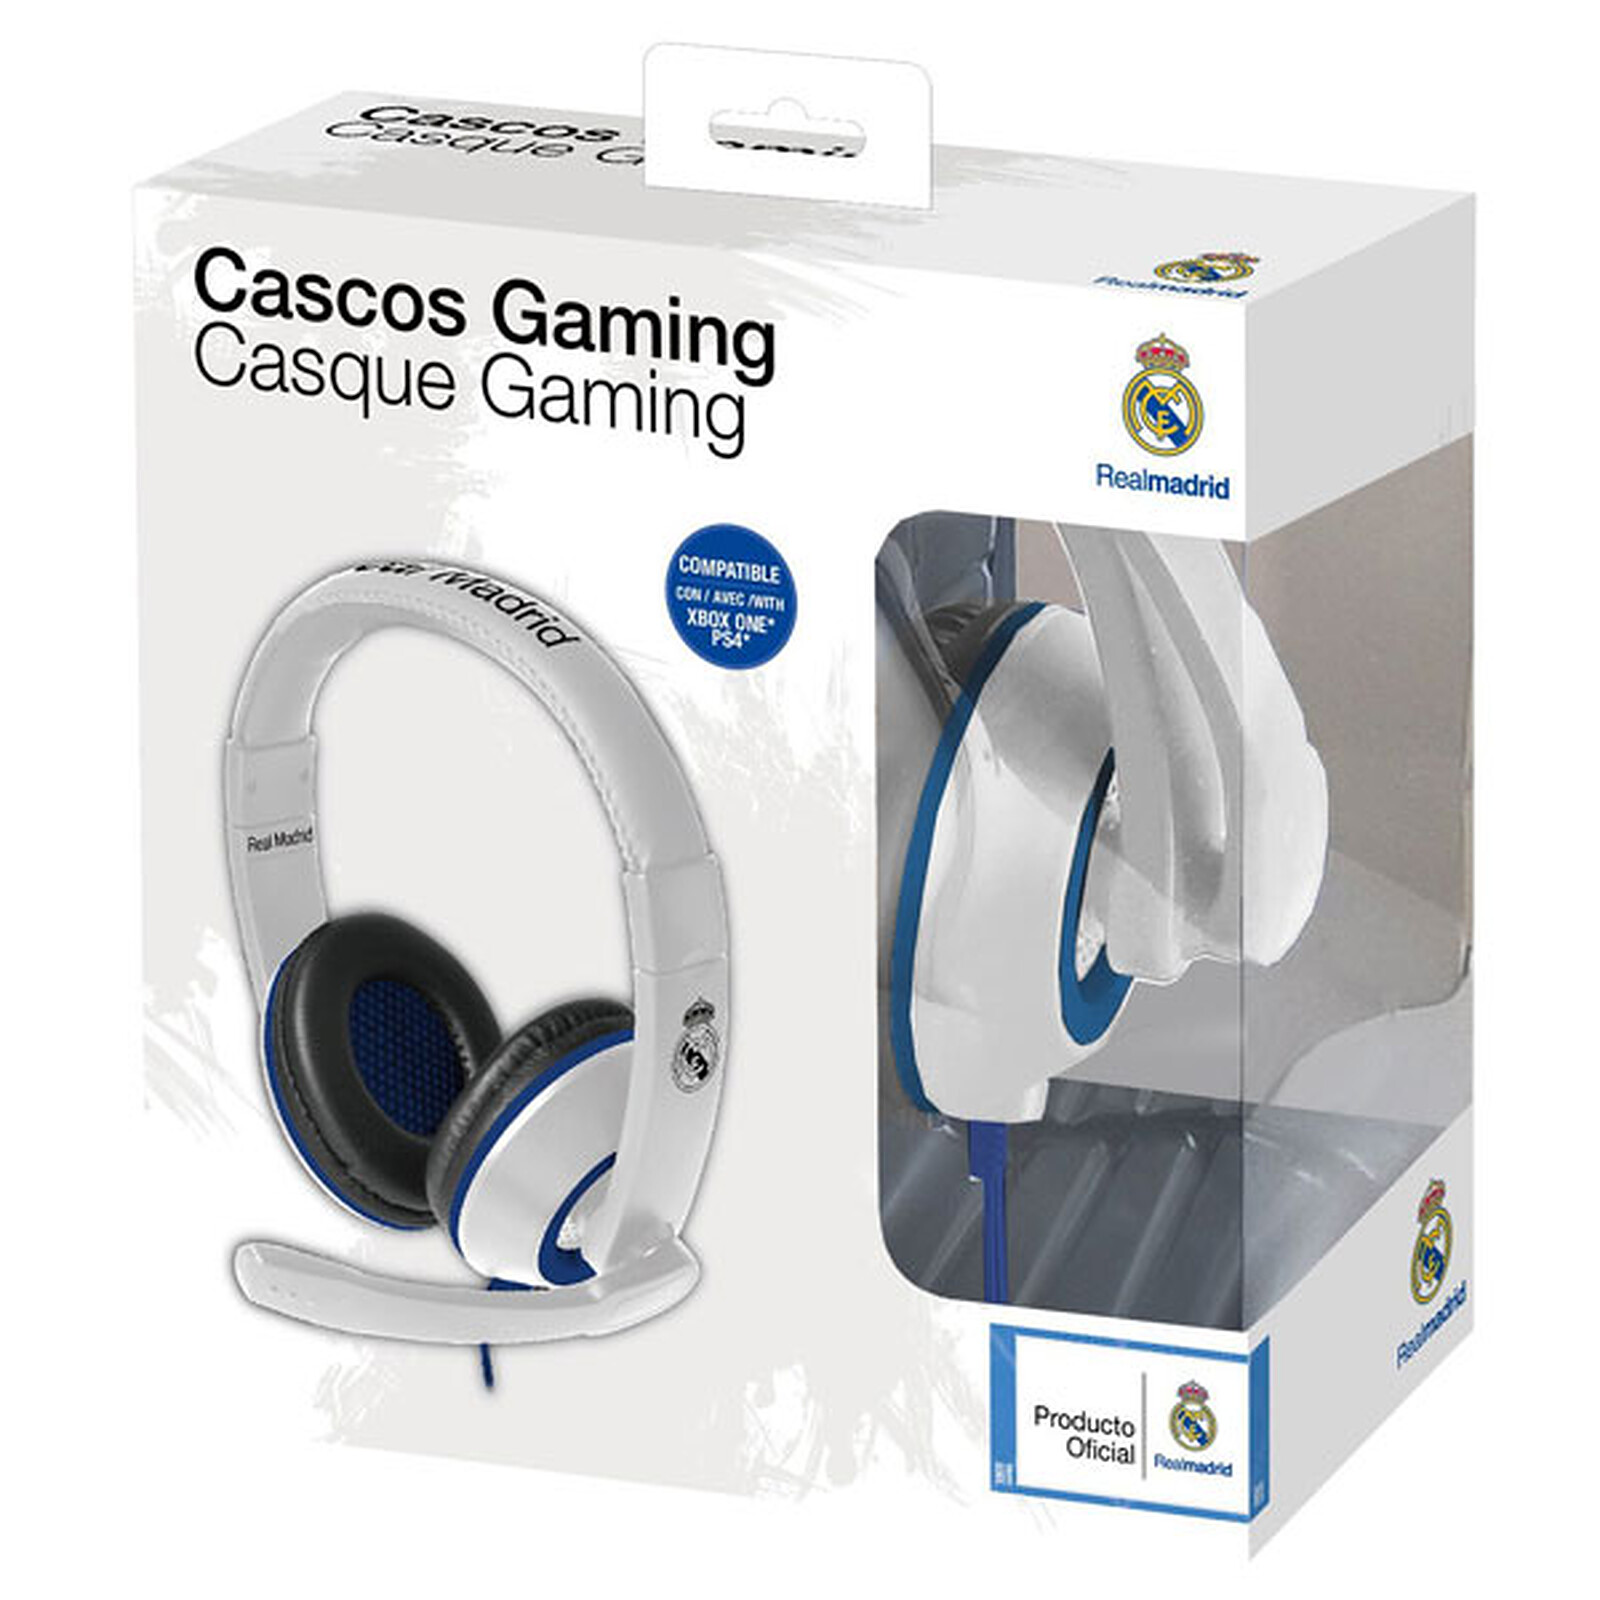 Subsonic Casque Gaming - Real Madrid - Accessoires PS4 - Garantie 3 ans  LDLC